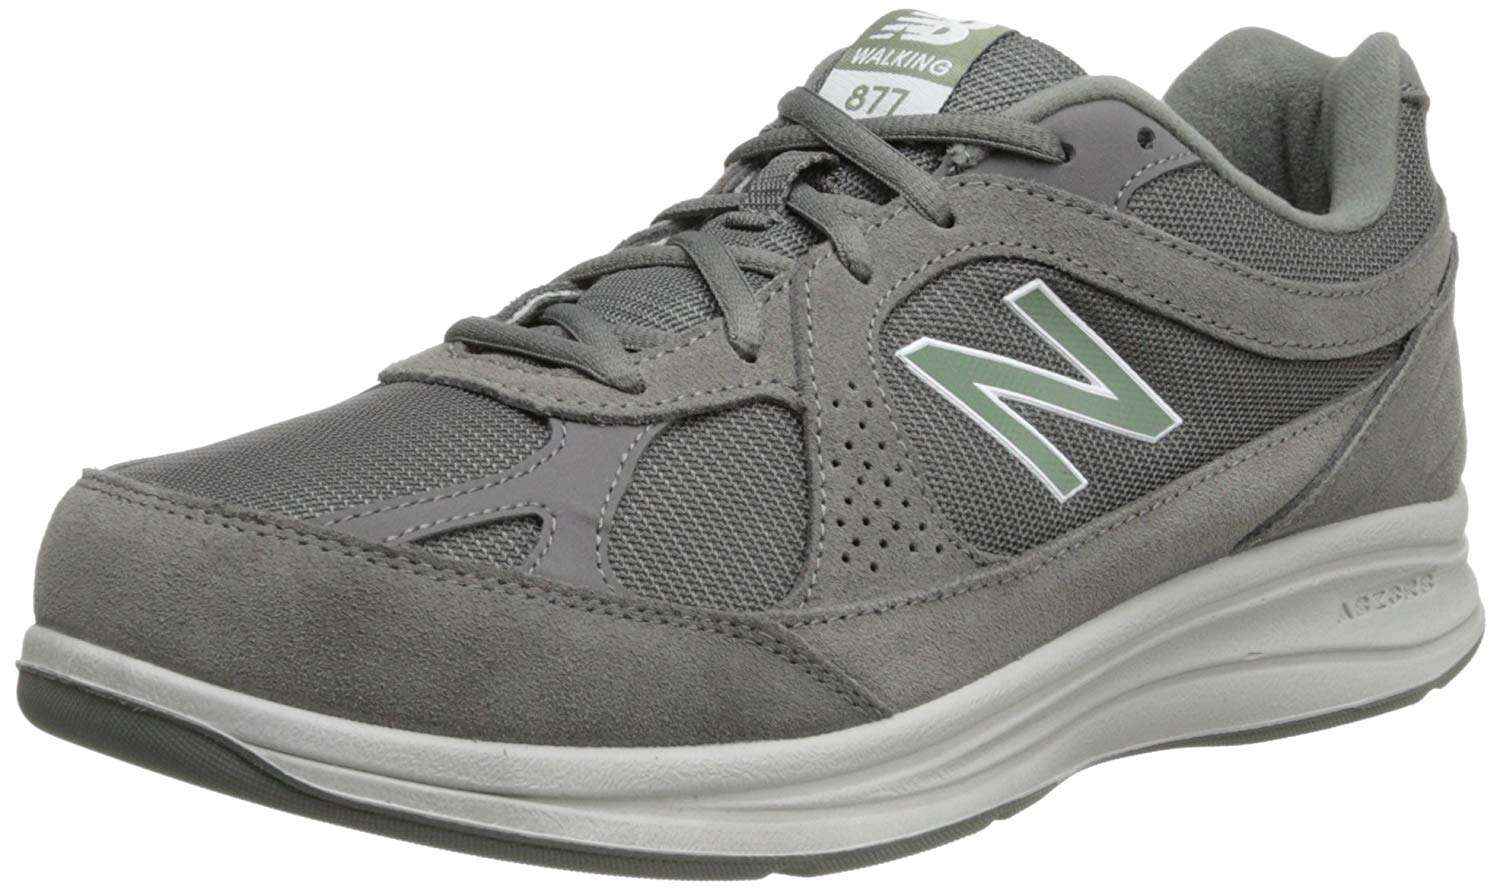 What Are The Best New Balance Walking Shoes - LoveShoesClub.com